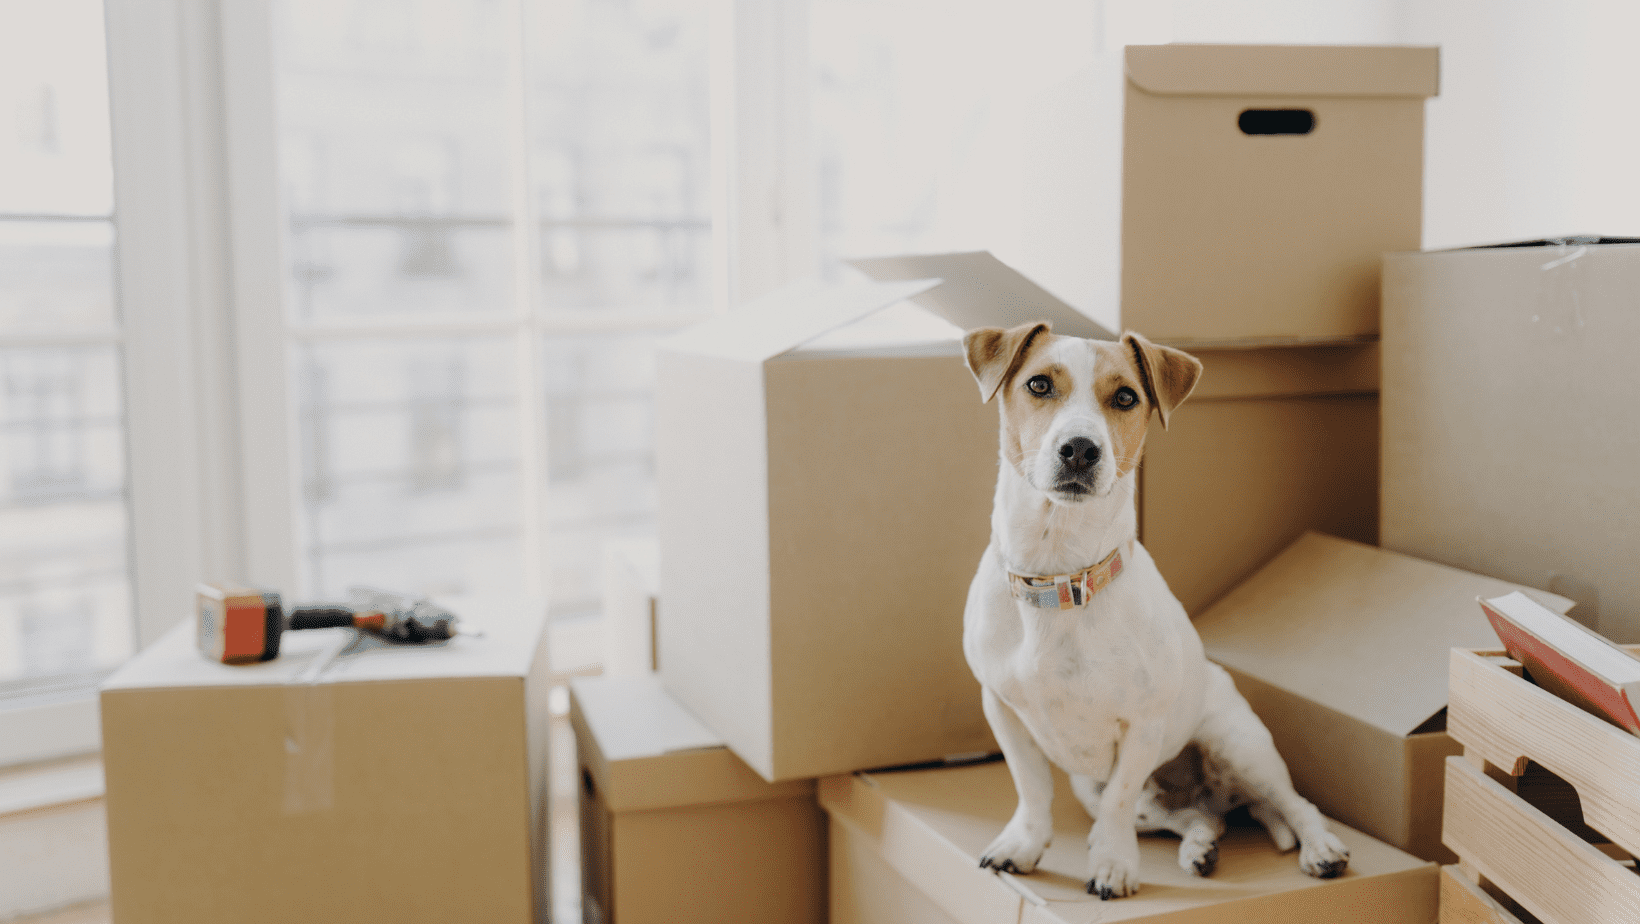 change pets microchip details when move house dog with packing boxes